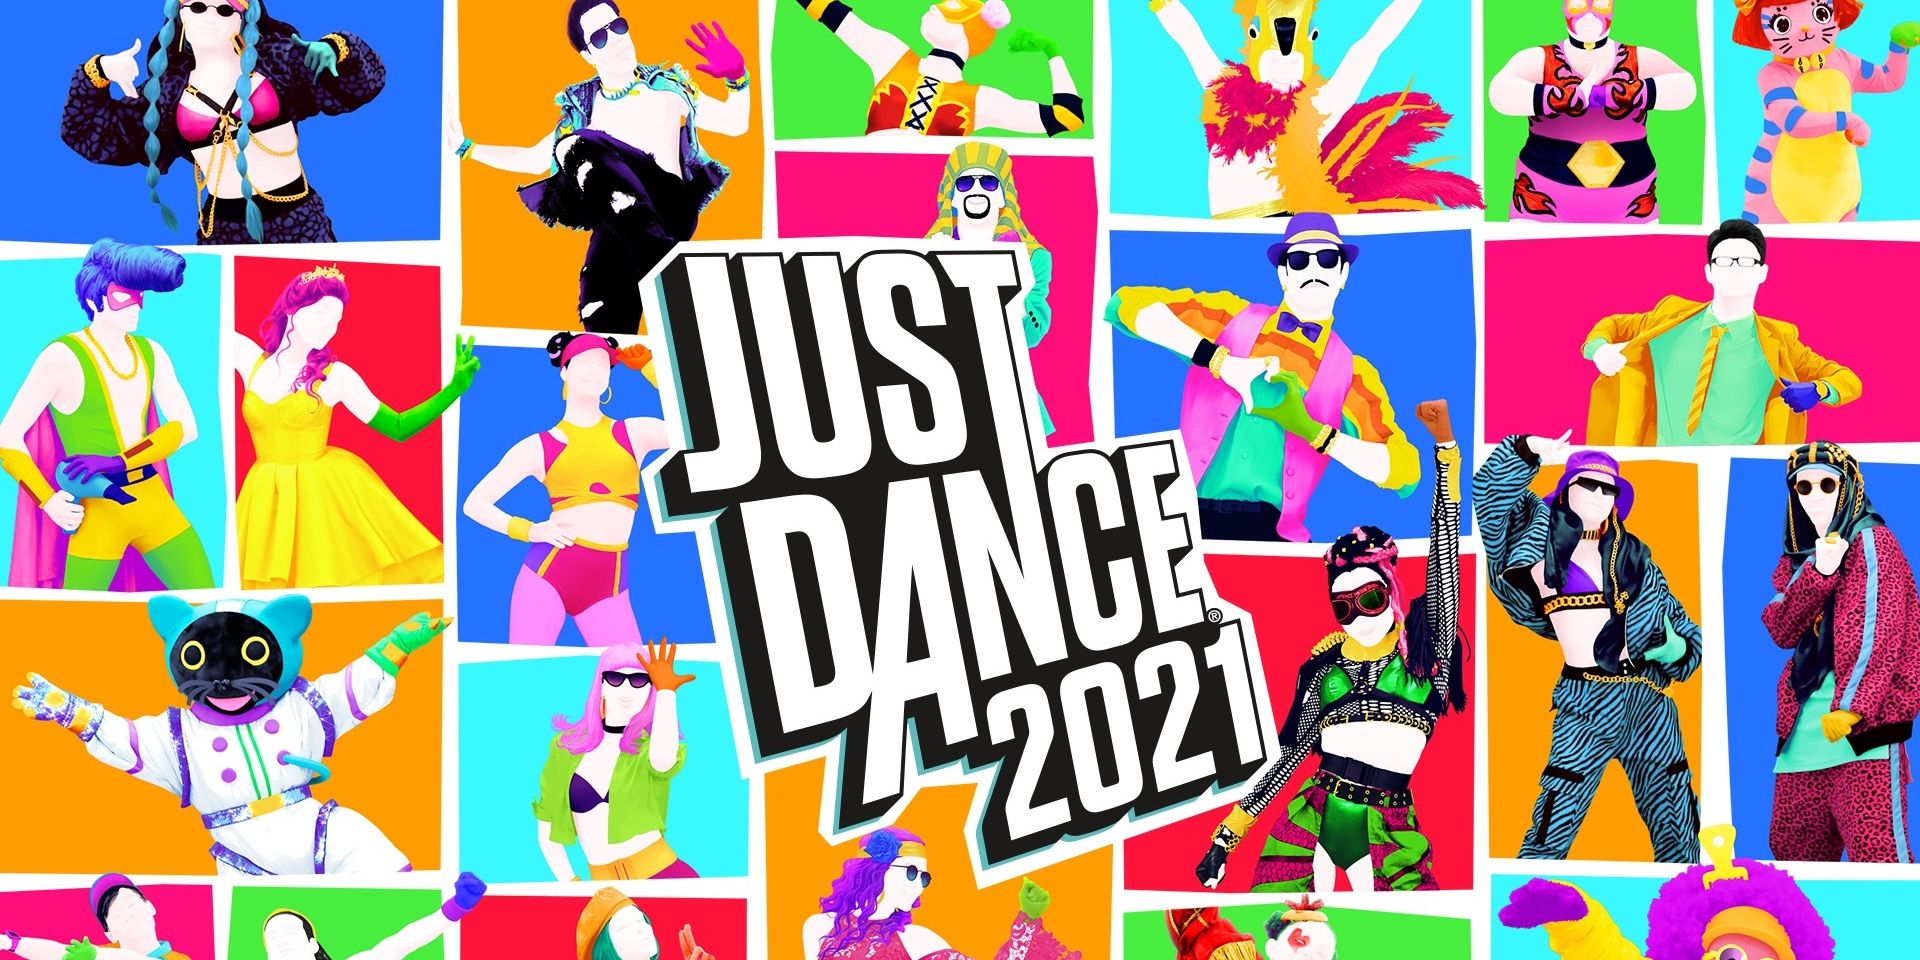 The title screen for Just Dance 2021.